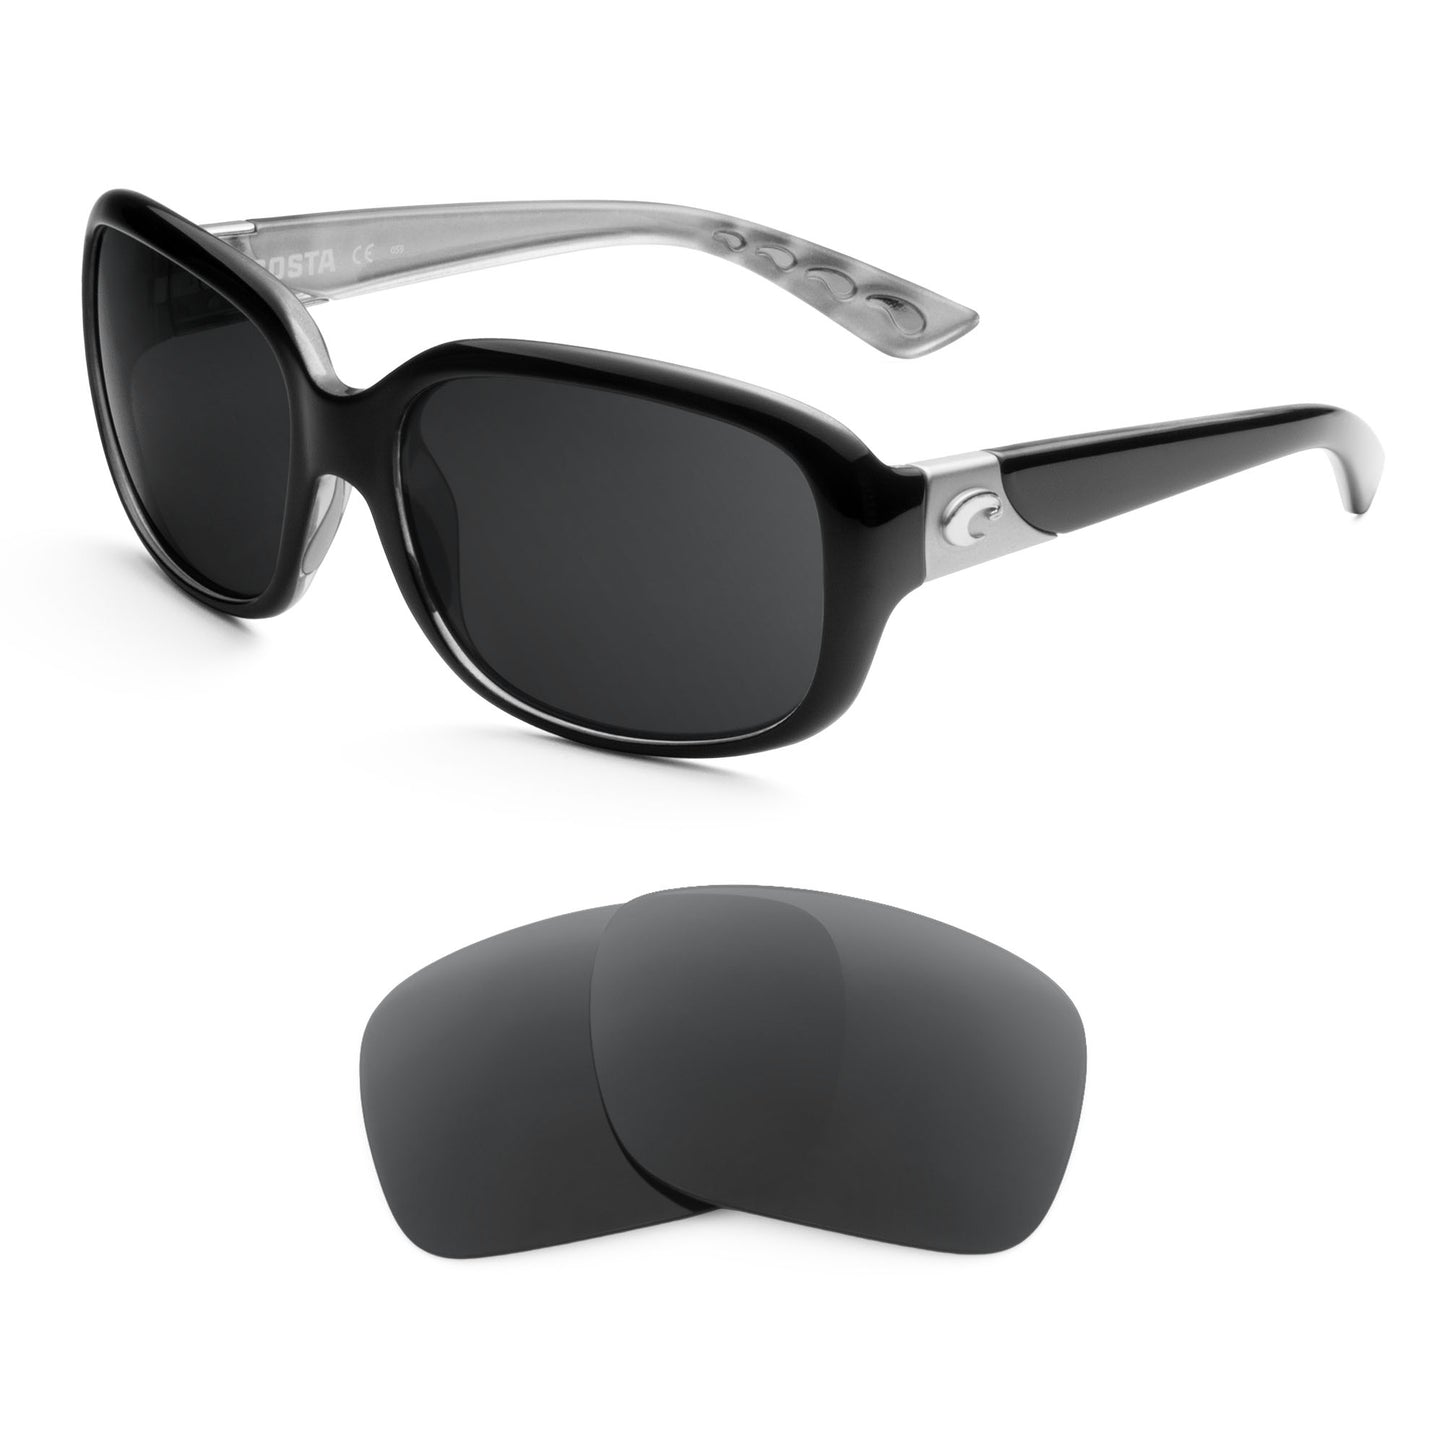 Costa Gannet sunglasses with replacement lenses